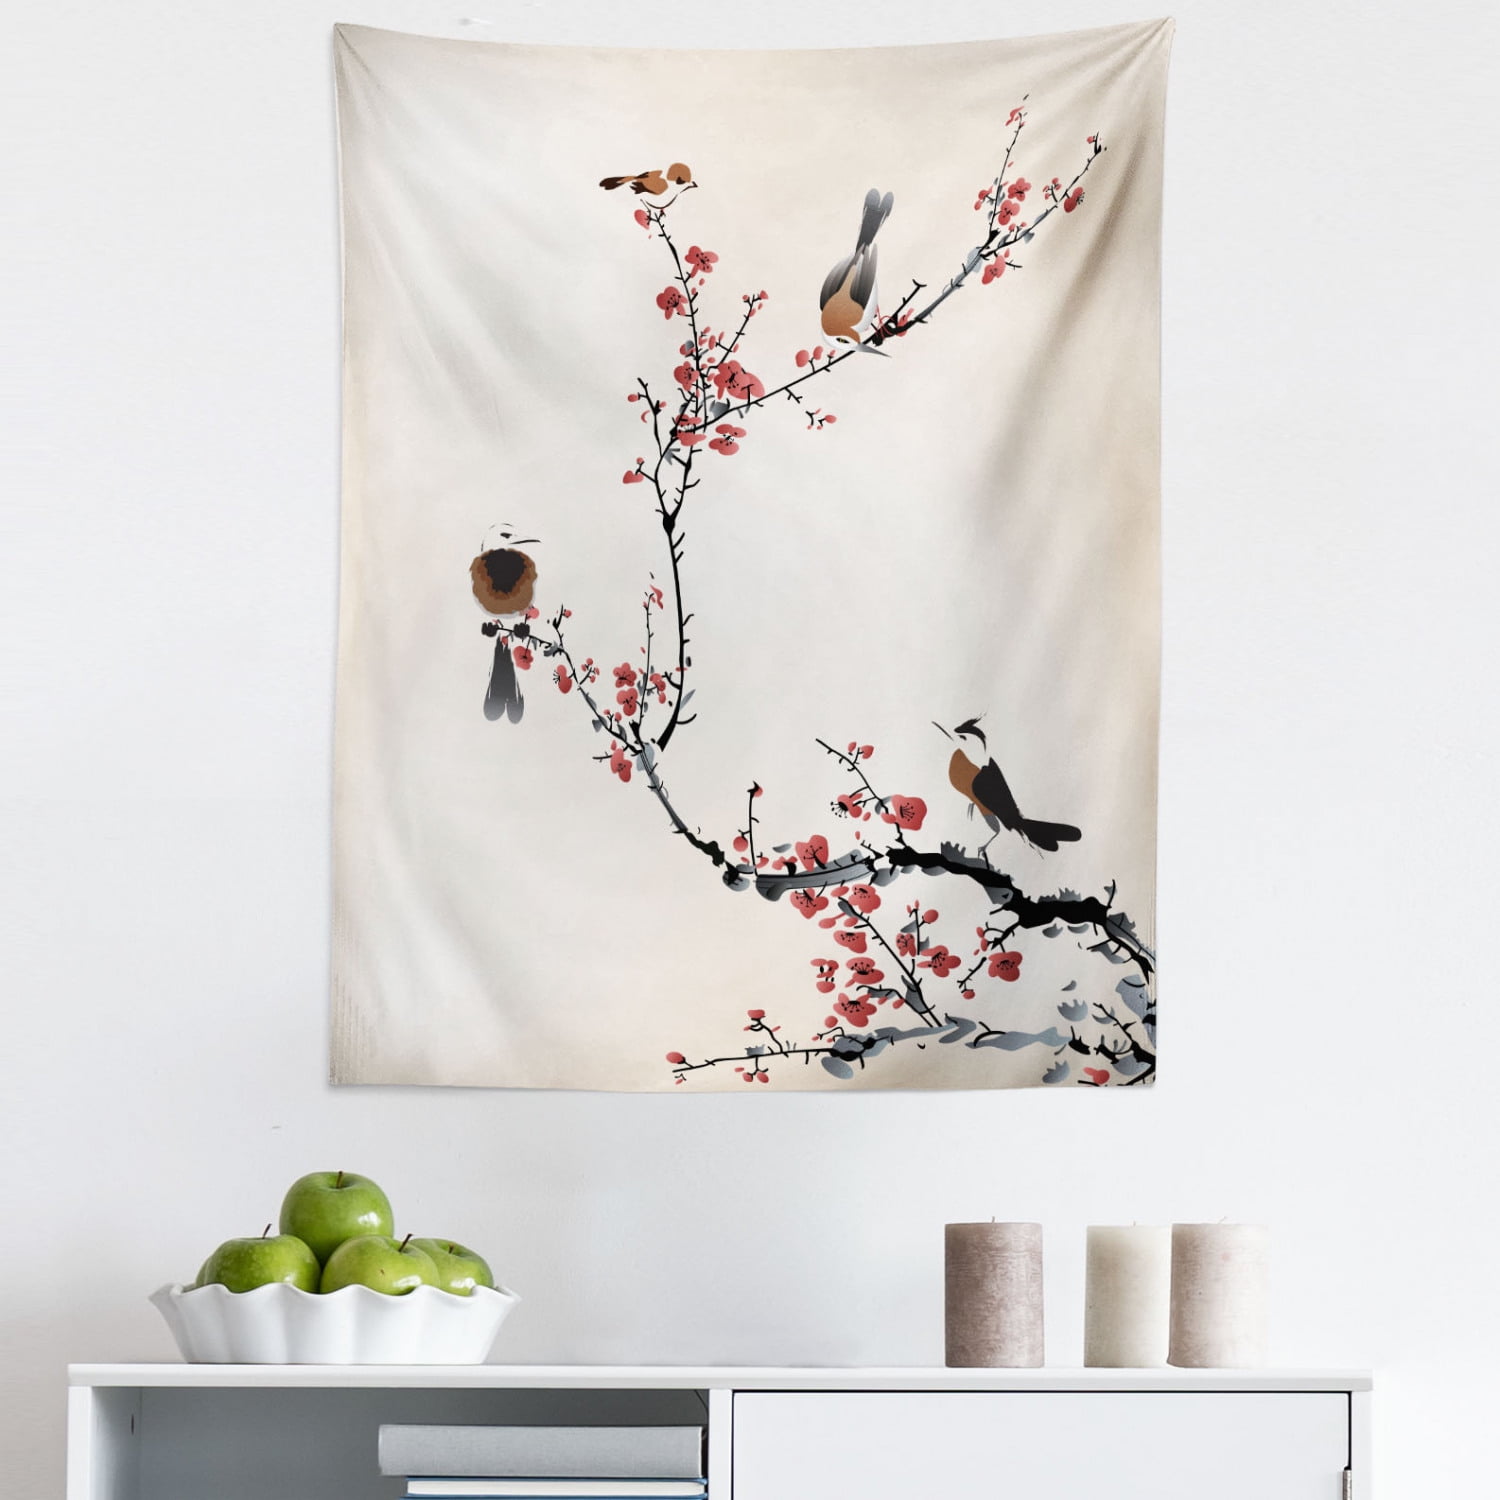 Tree Tapestry, Birds on Cherry Summer Classic Oriental Illustration Pastel  Colored Design, Fabric Wall Hanging Decor for Bedroom Living Room Dorm,  Sizes, Pale Caramel Ruby, by Ambesonne